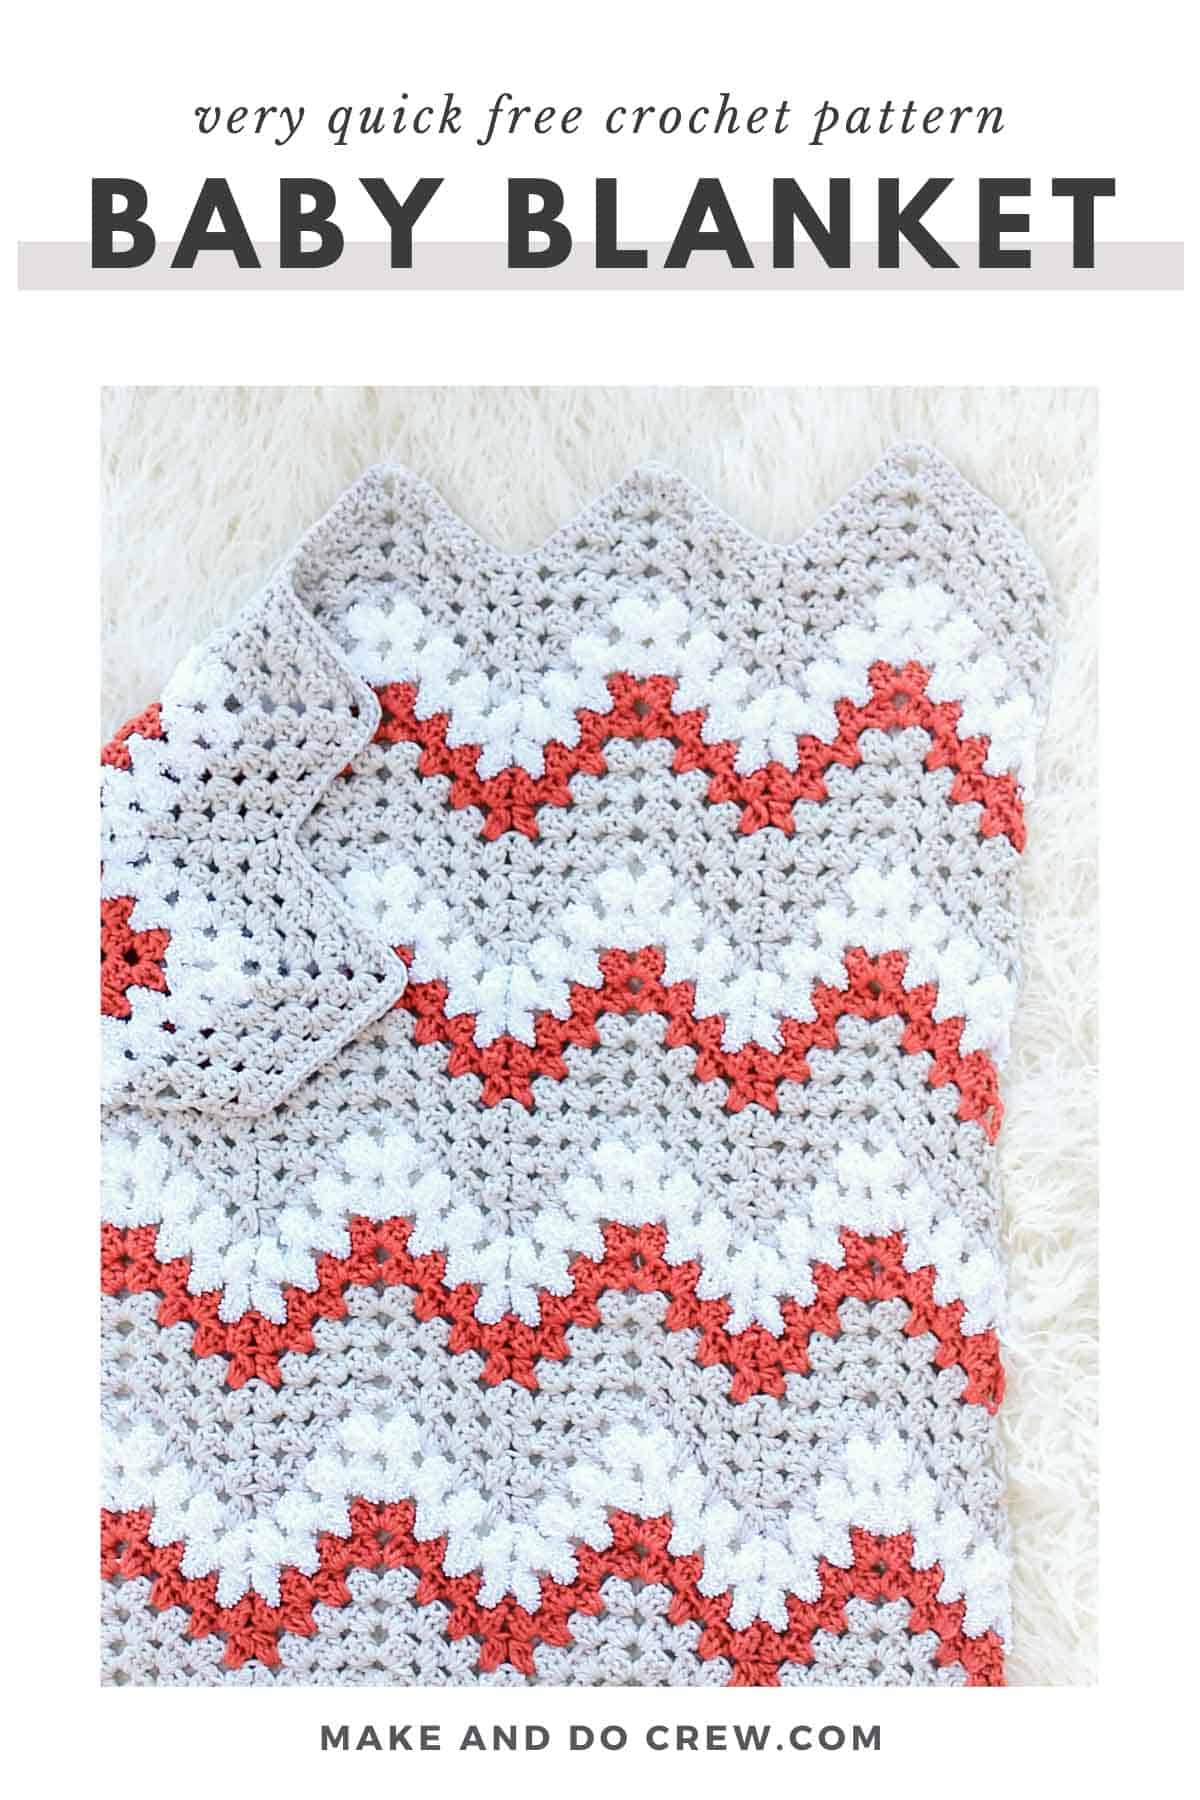 Granny ripple stitch crochet baby blanket pattern using Lion Brand Baby Soft Boucle and Feels Like Butta.